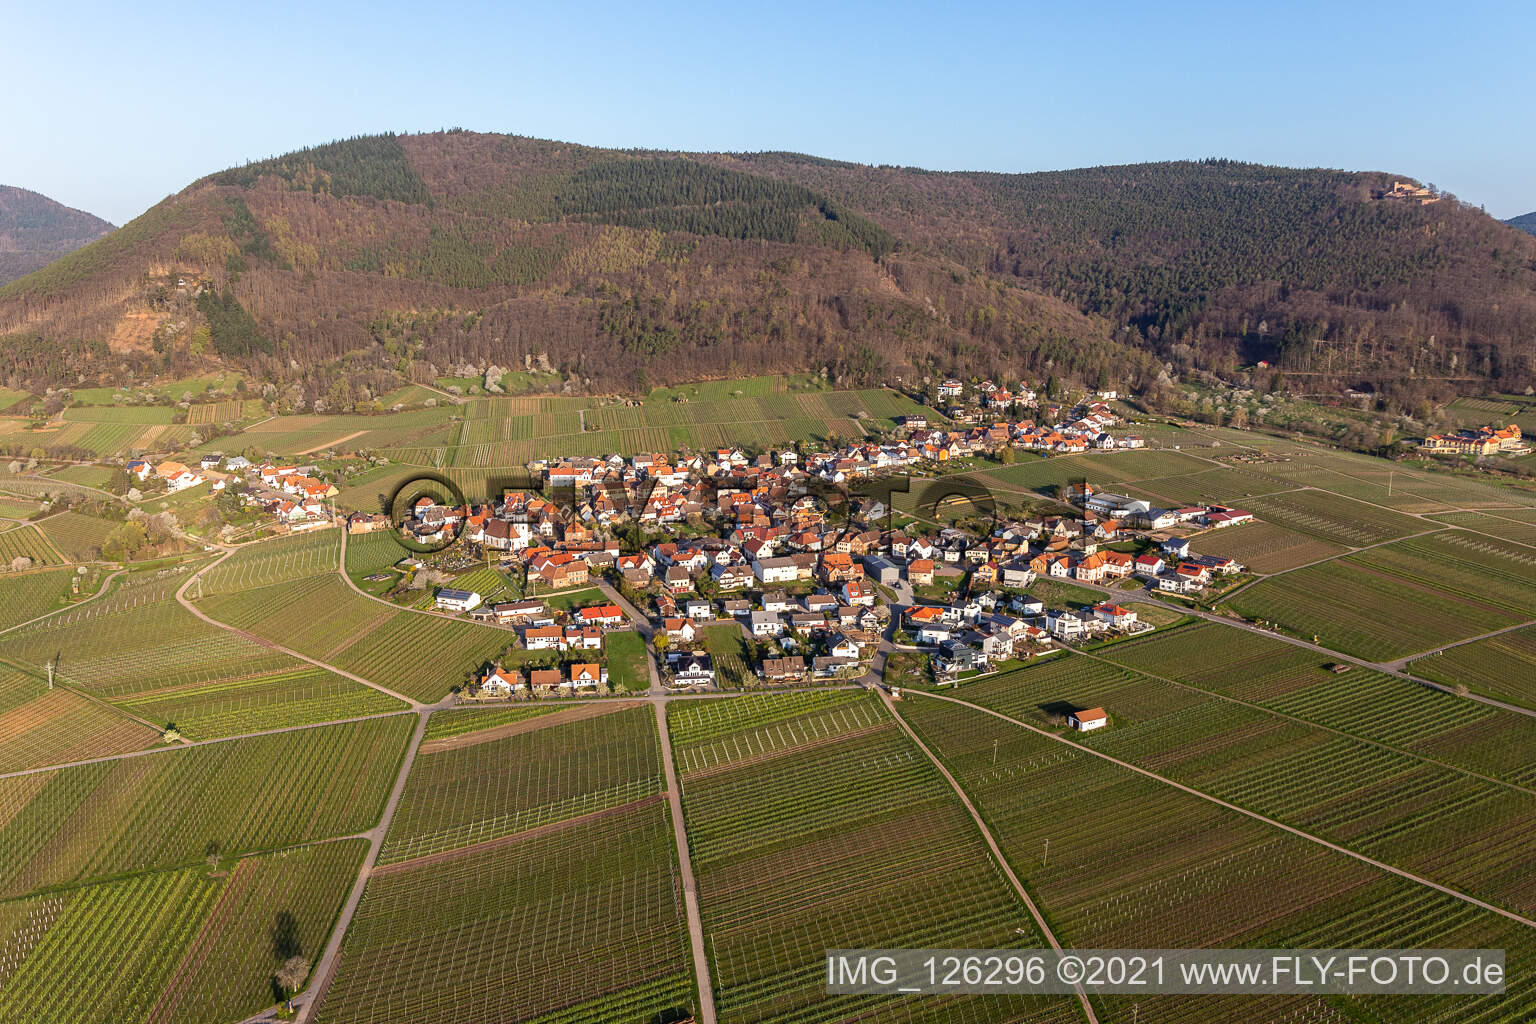 Village on the edge of vineyards and wineries in the wine-growing area in Weyher in der Pfalz in the state Rhineland-Palatinate, Germany